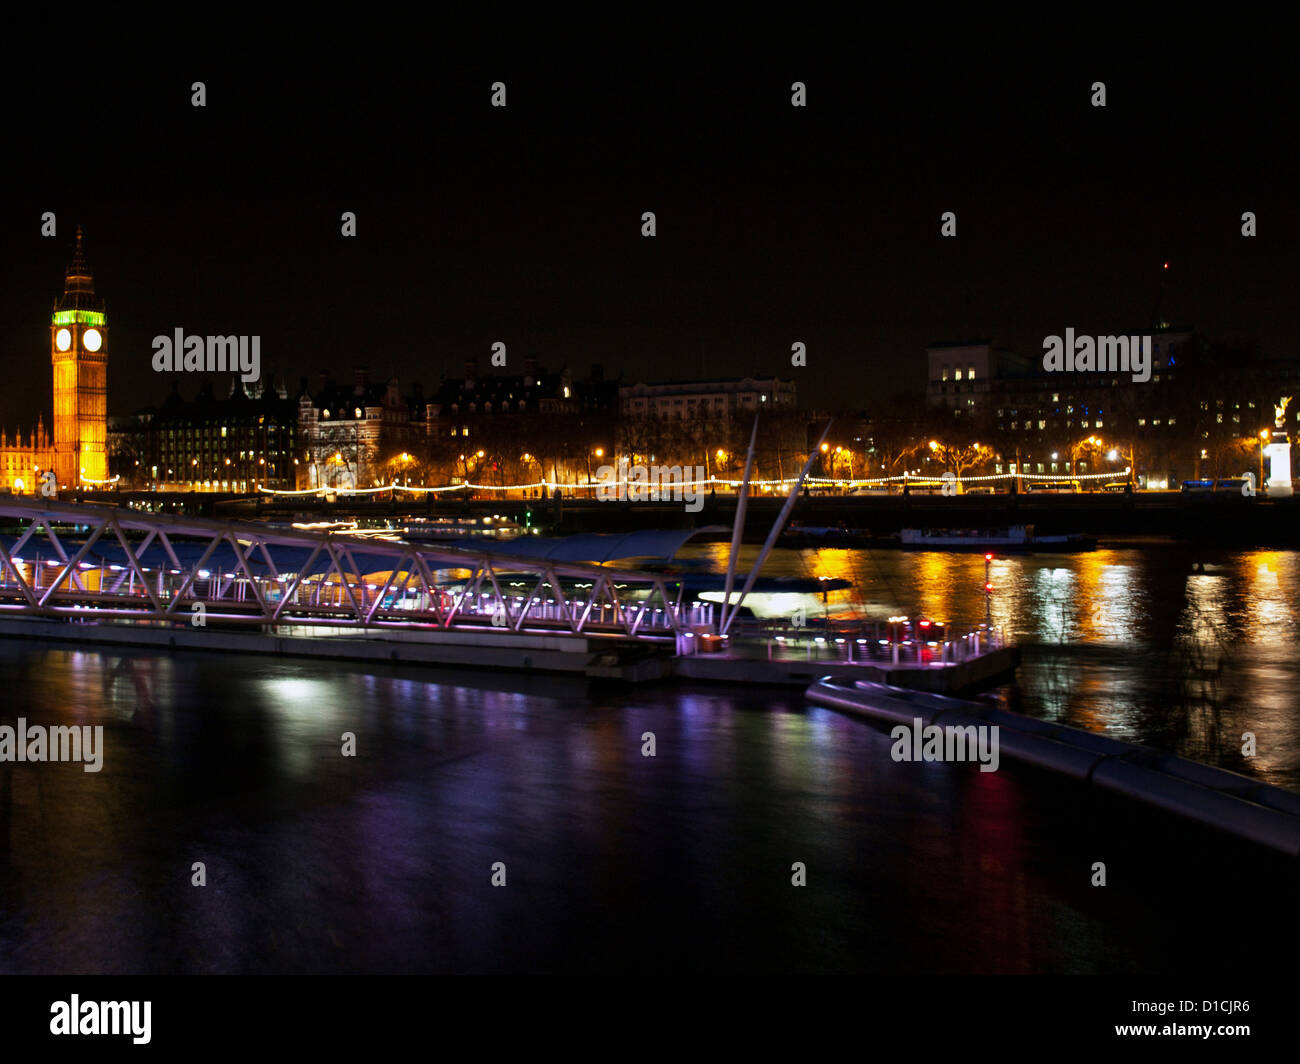 View of River Thames, Embankment, Big Ben clock tower, UNESCO World Heritage Site, City of Westminster, London, England, UK Stock Photo